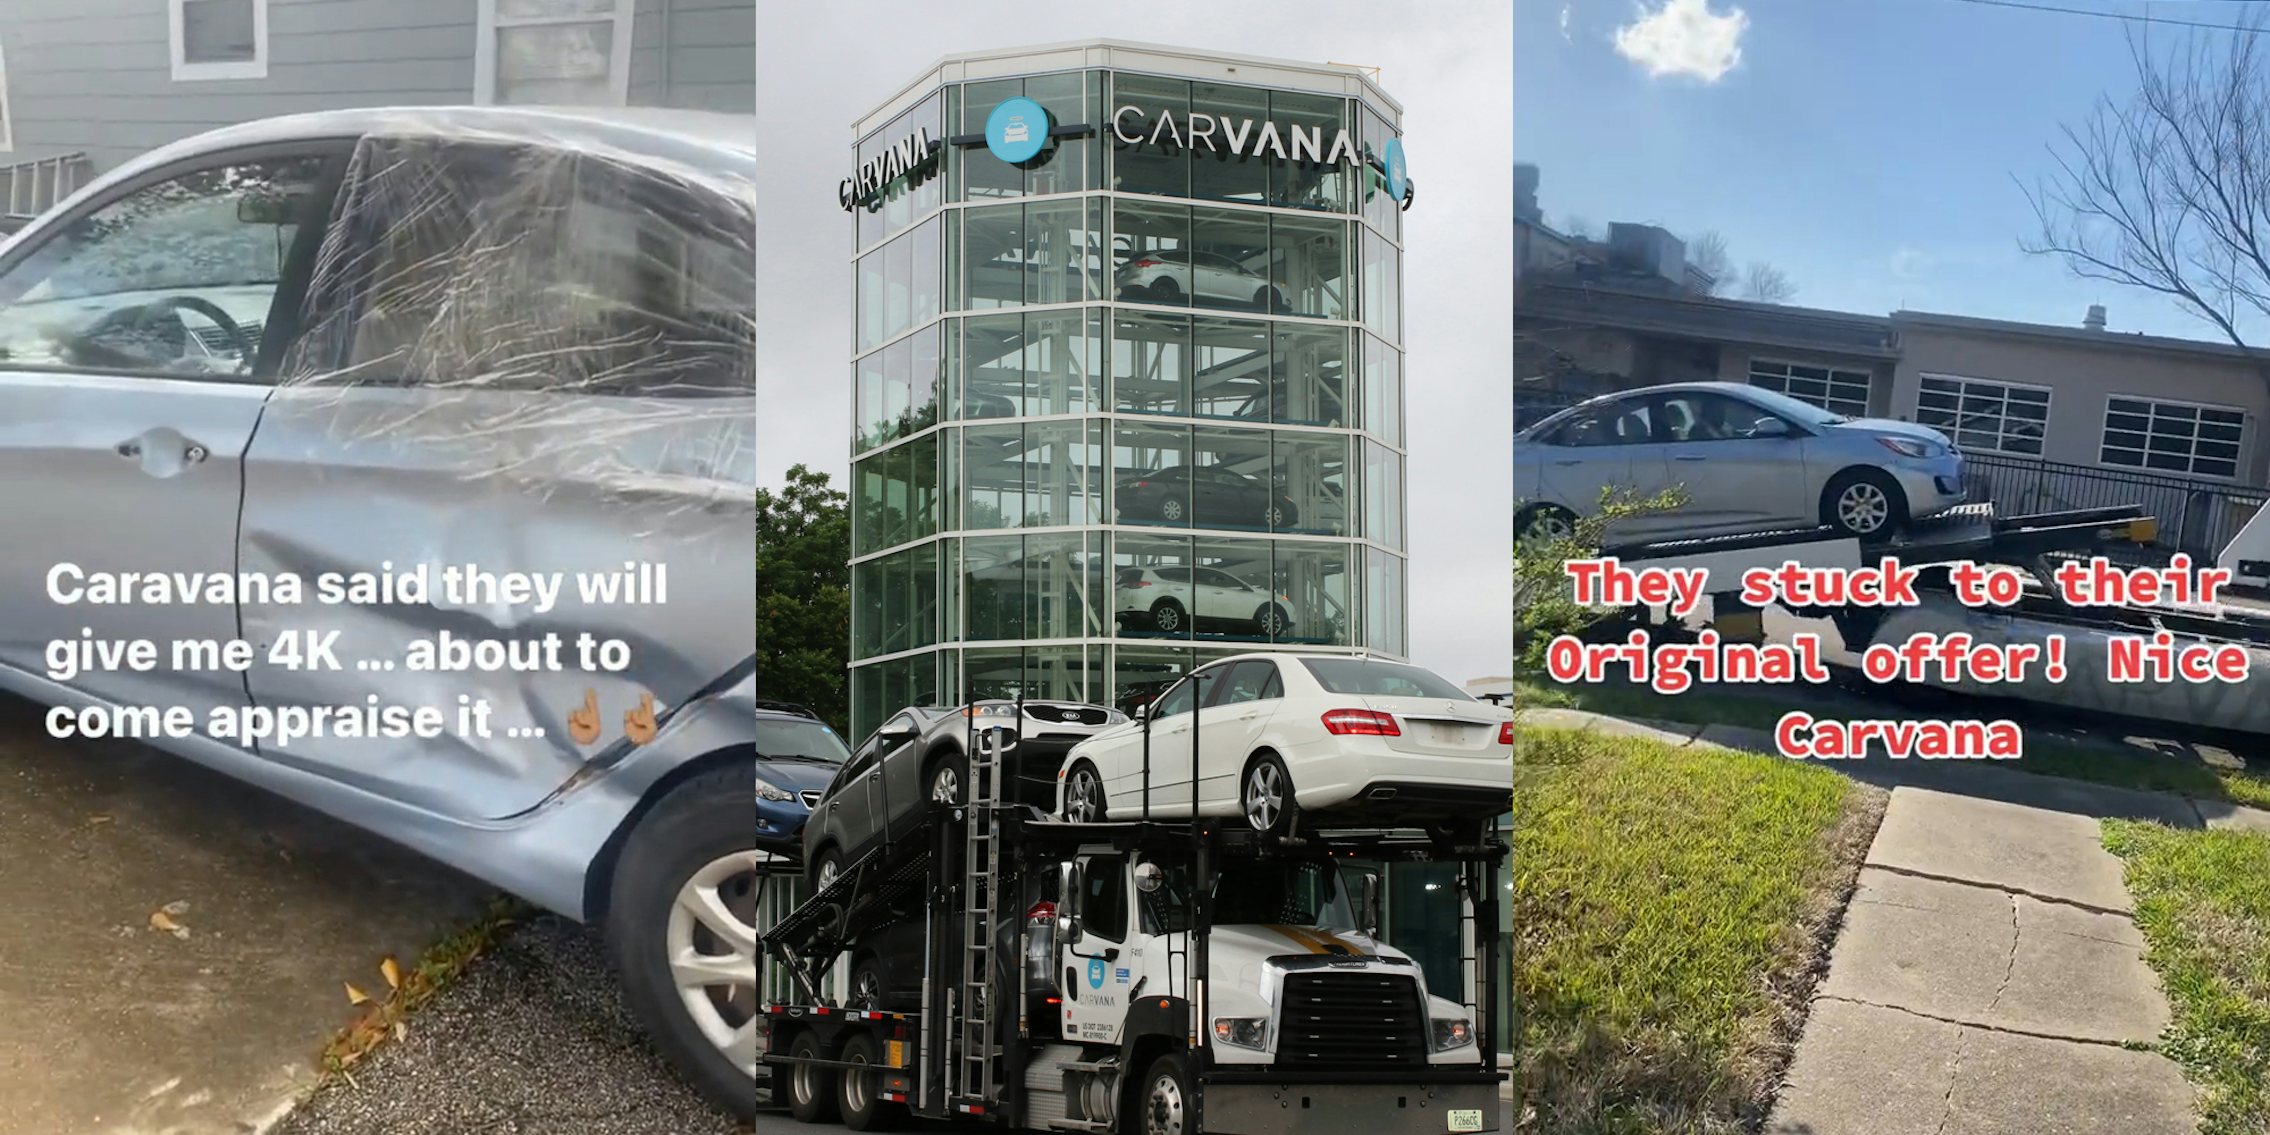 damaged car in driveway with caption 'Carvana said they will give me 4k... about to come appraise it...' (l) Carvana sign on building with cars on tow (c) car on tow with caption 'They stuck to their original offer! Nice Carvana' (r)